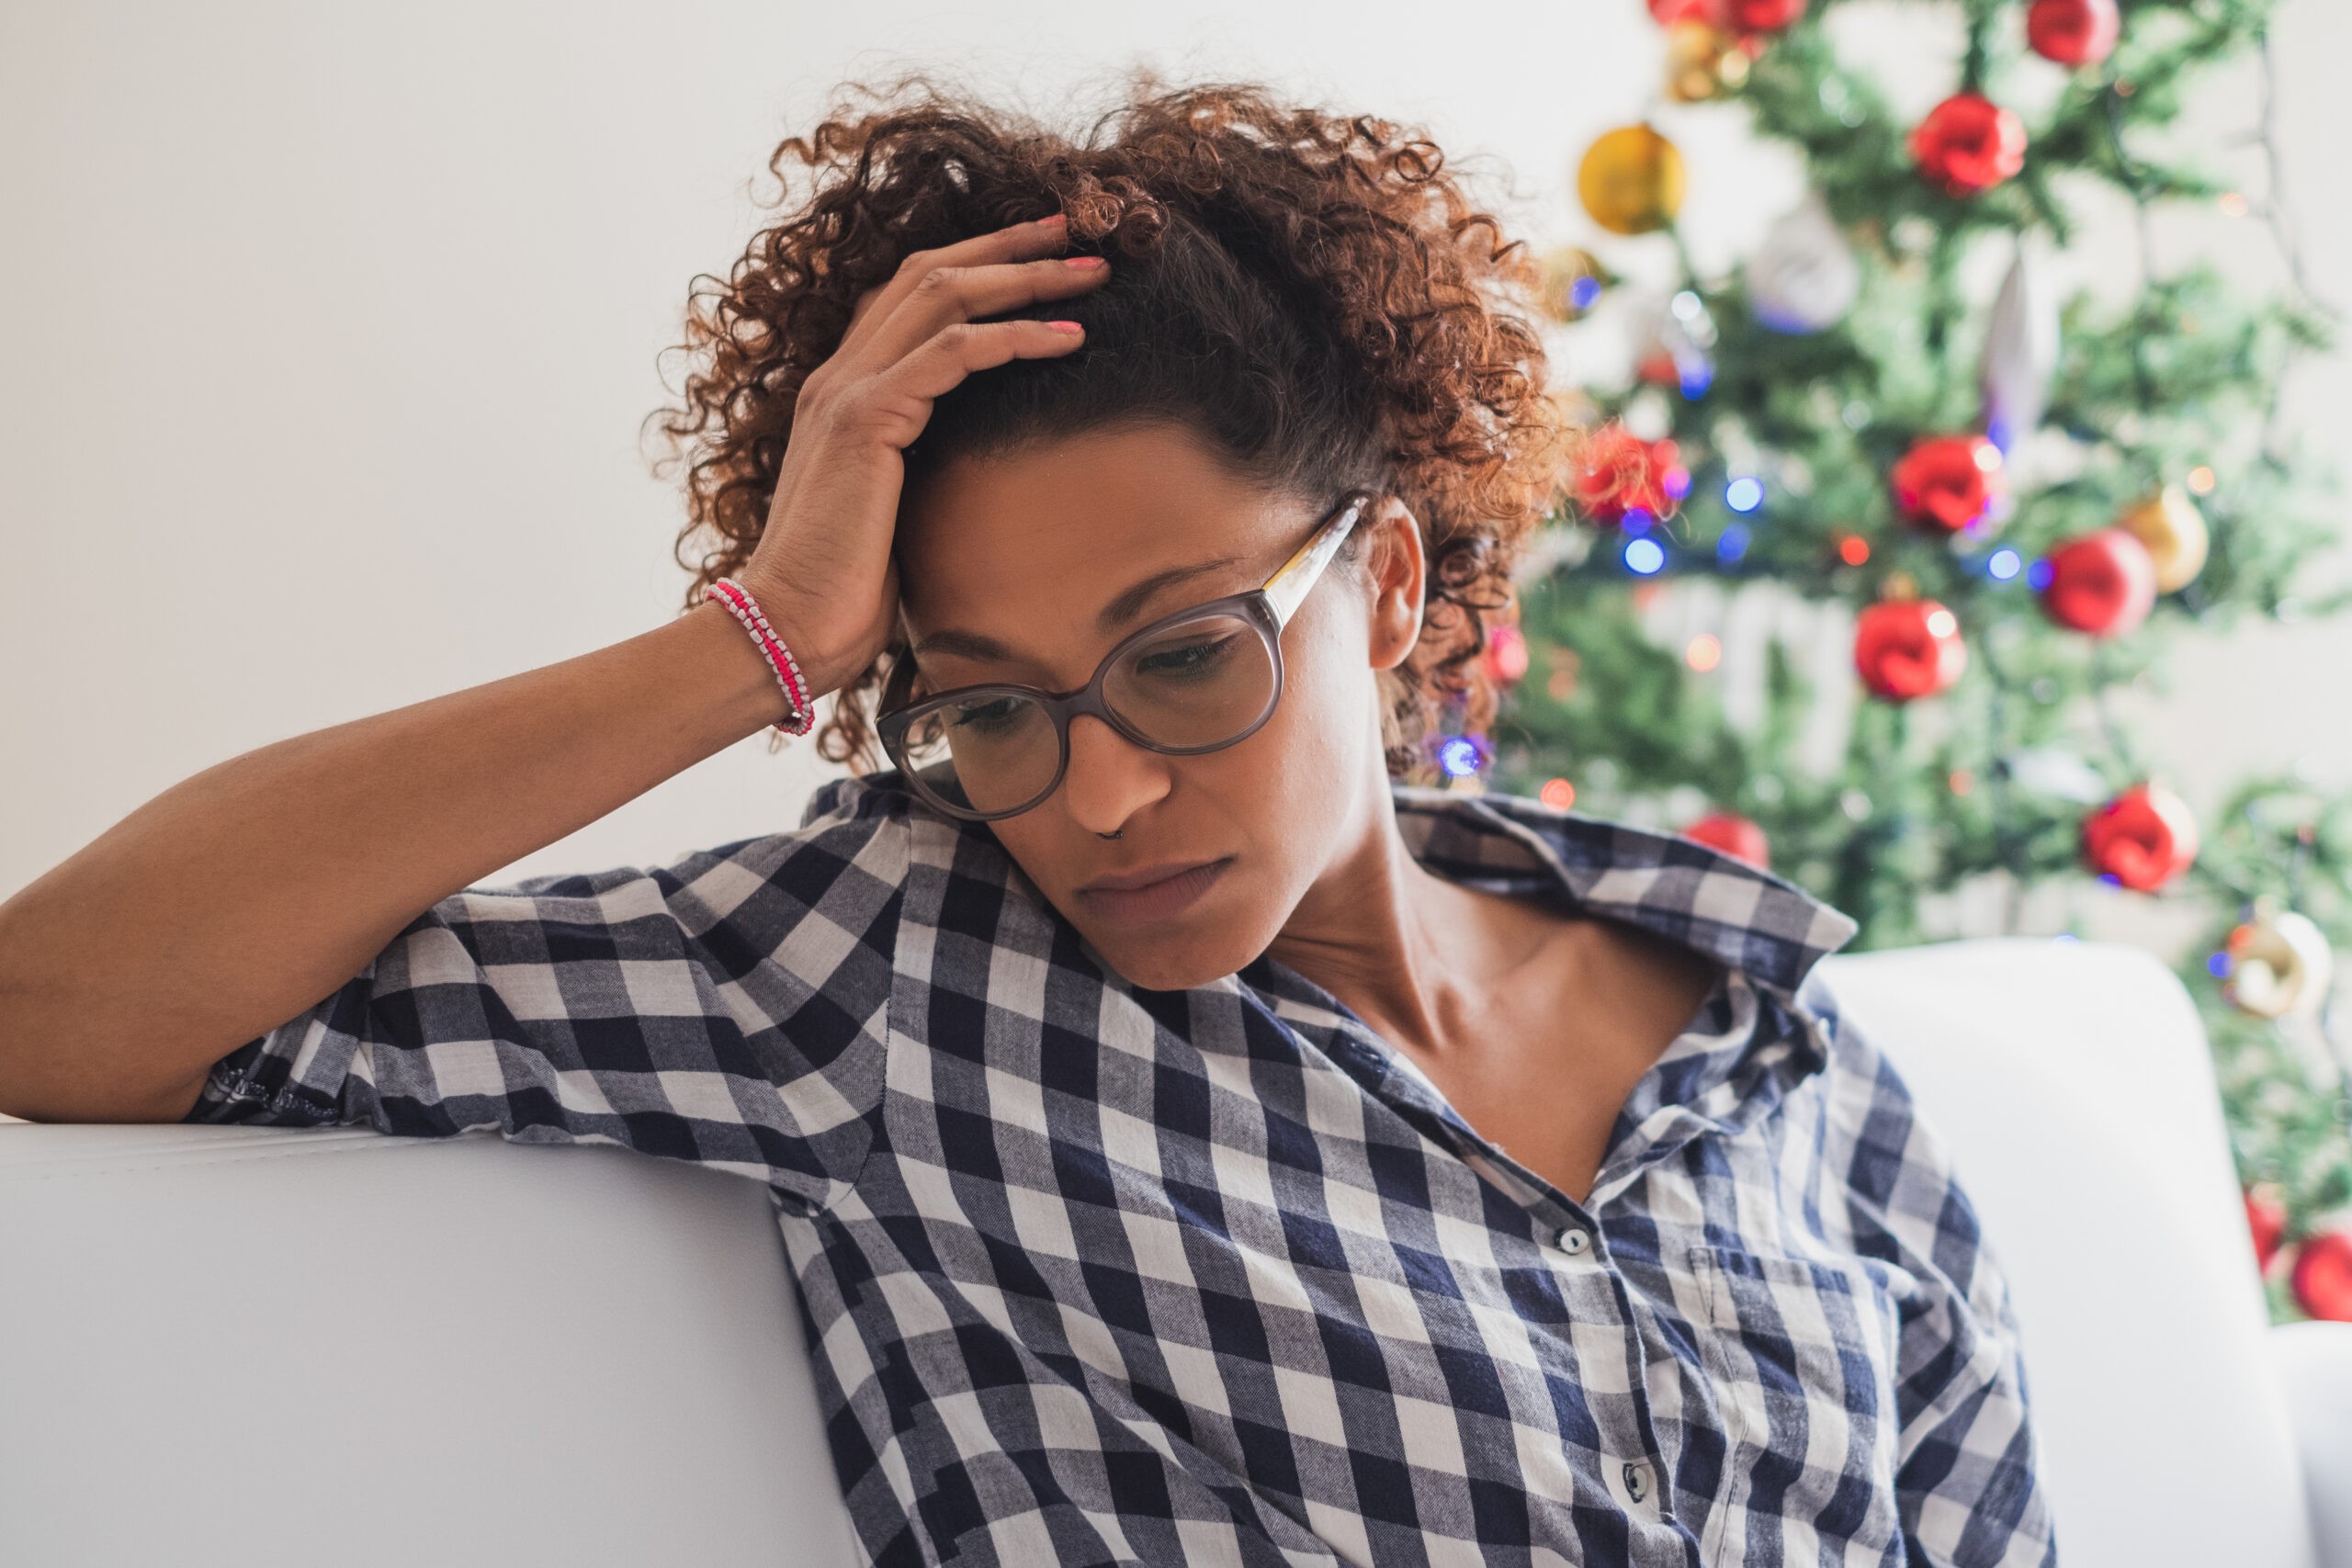 Dealing with Conflict During the Holidays